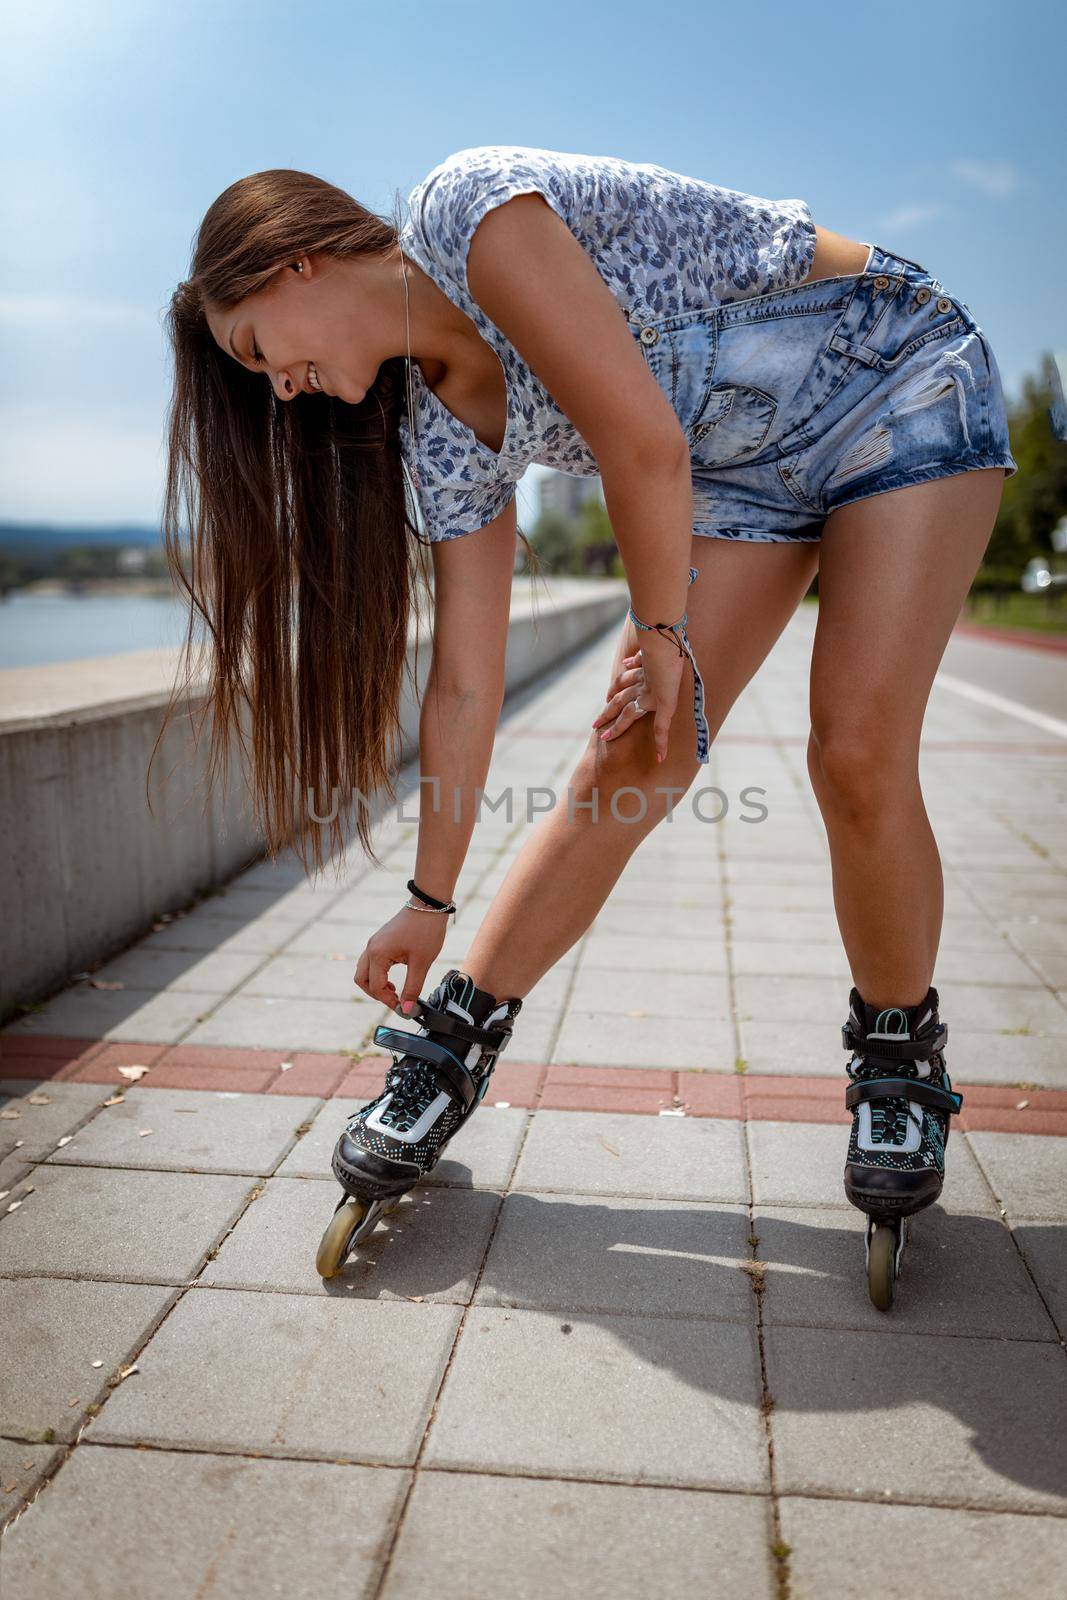 Young Female Skater by MilanMarkovic78